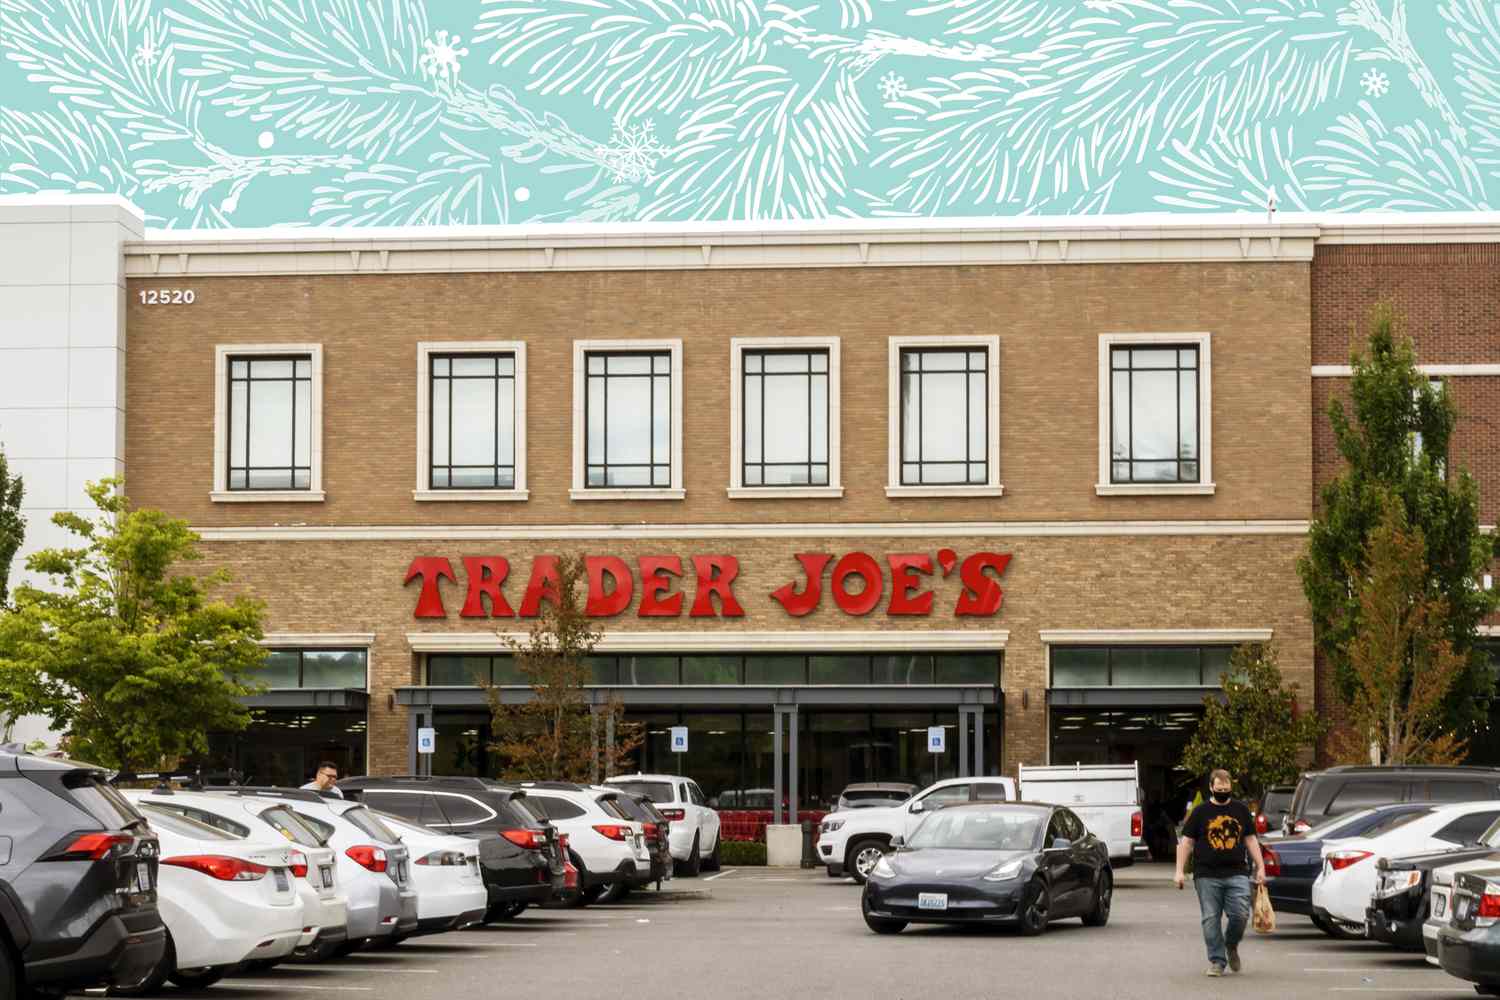 Trader joe's storefront with a holiday designed treatment